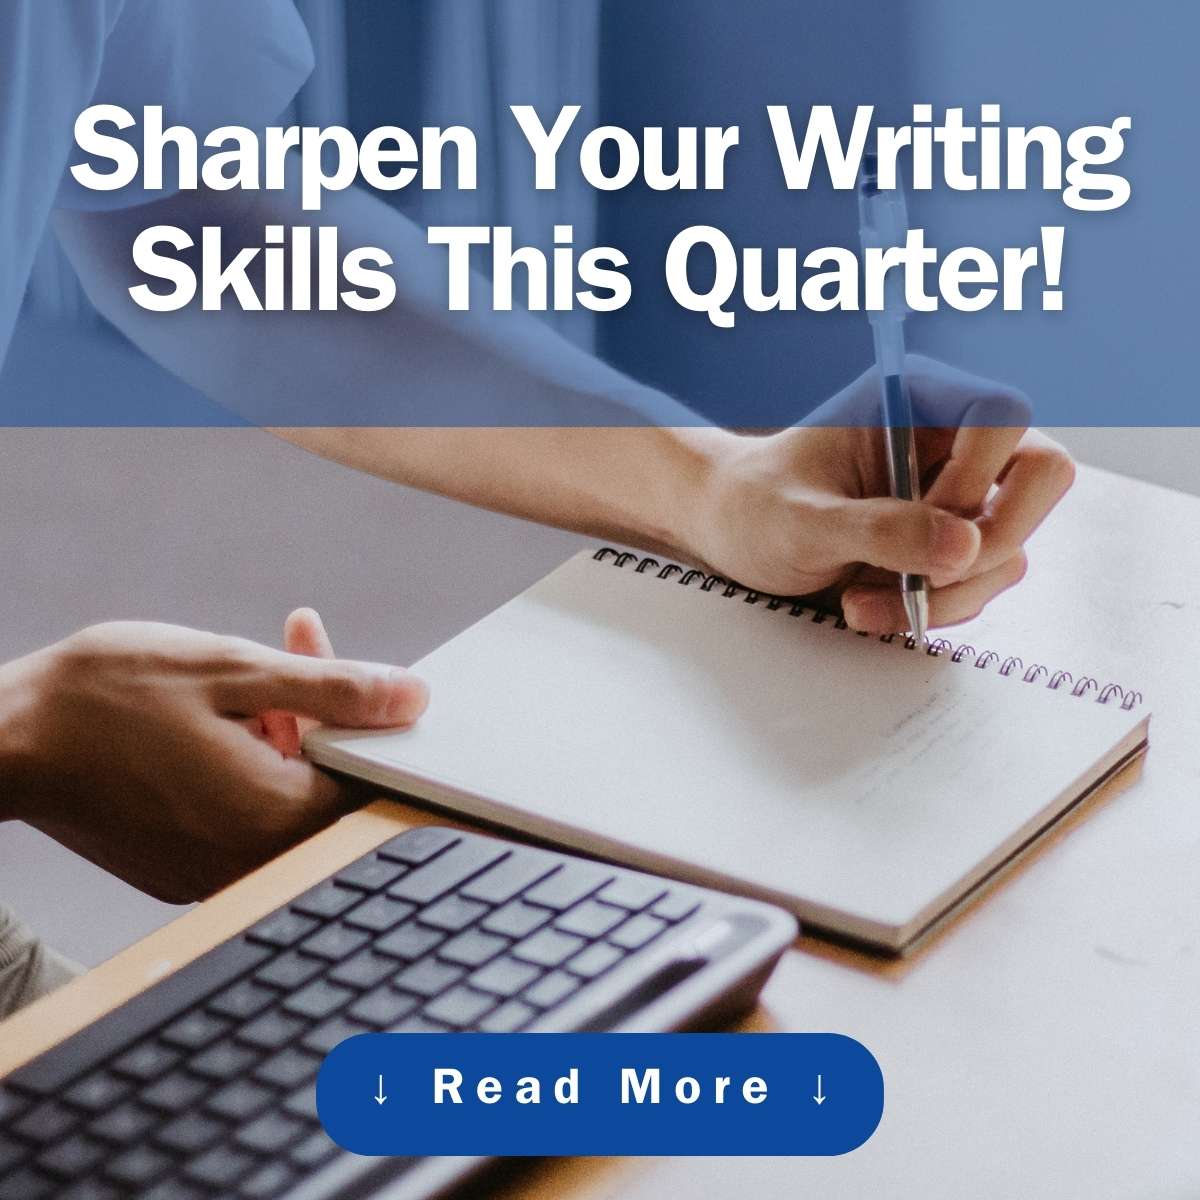 Sharpen Your Writing Skills This Quarter with a Writing Class